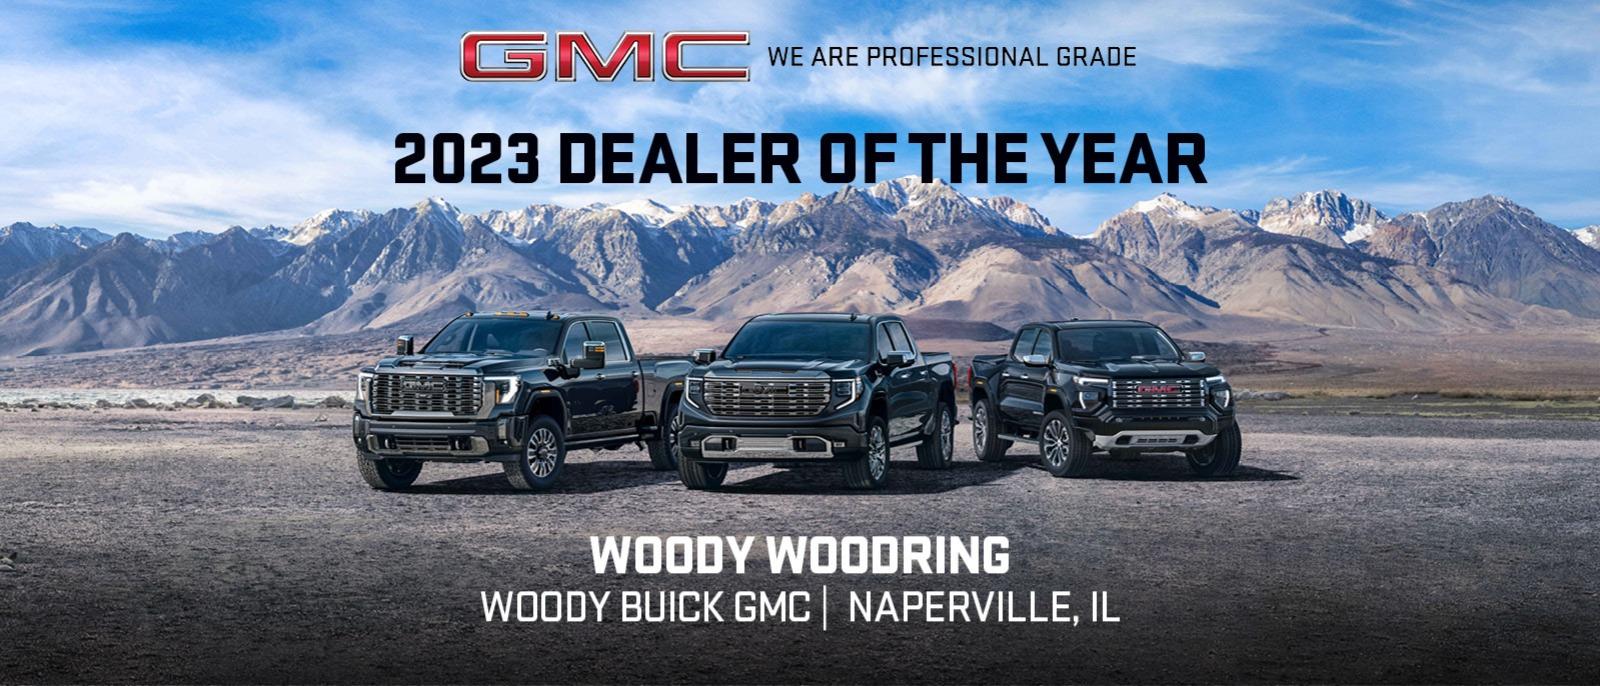 2023 Dealer of the year